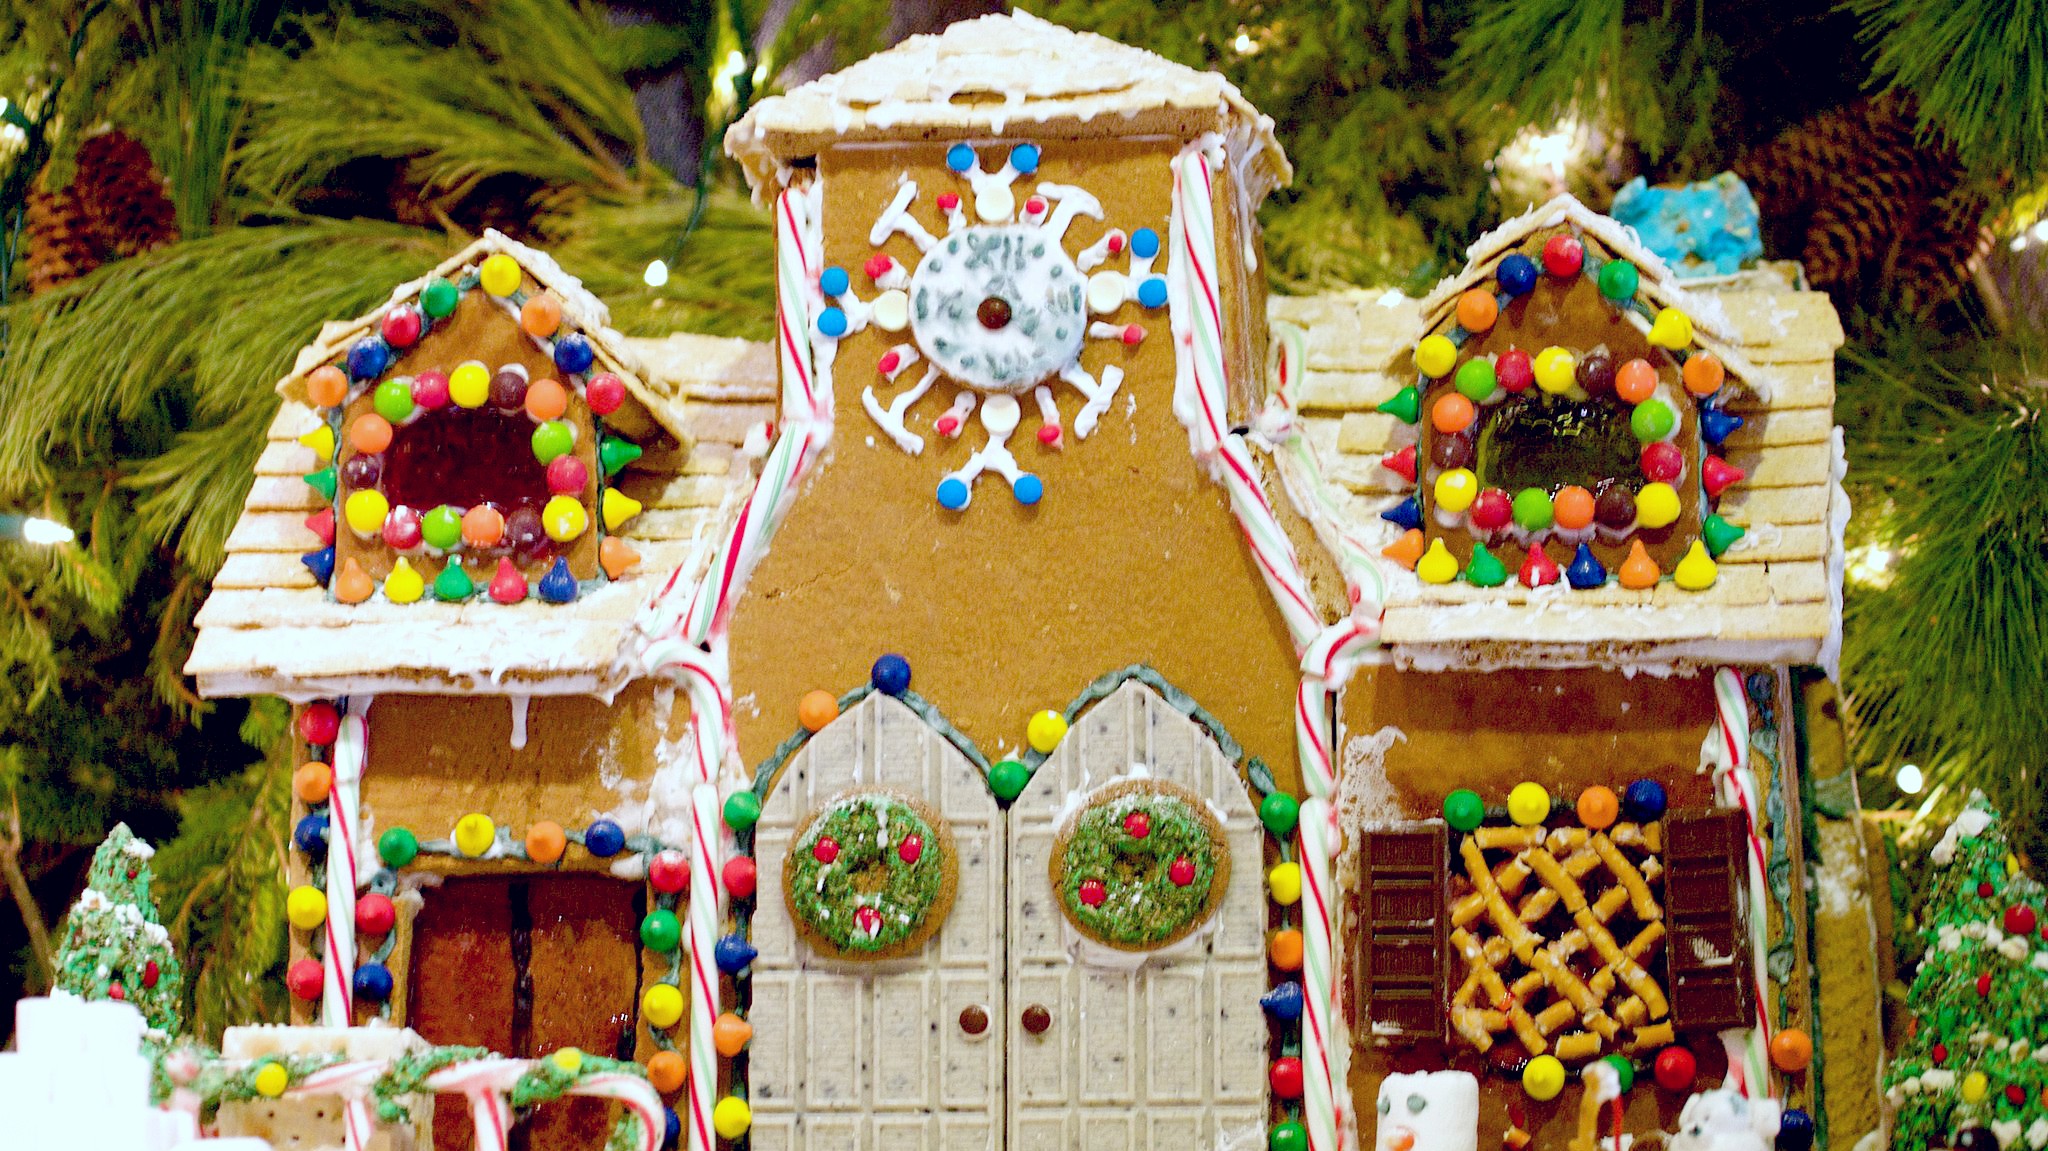 Build Your Gingerbread House Using Marshmallow Treats For Stability